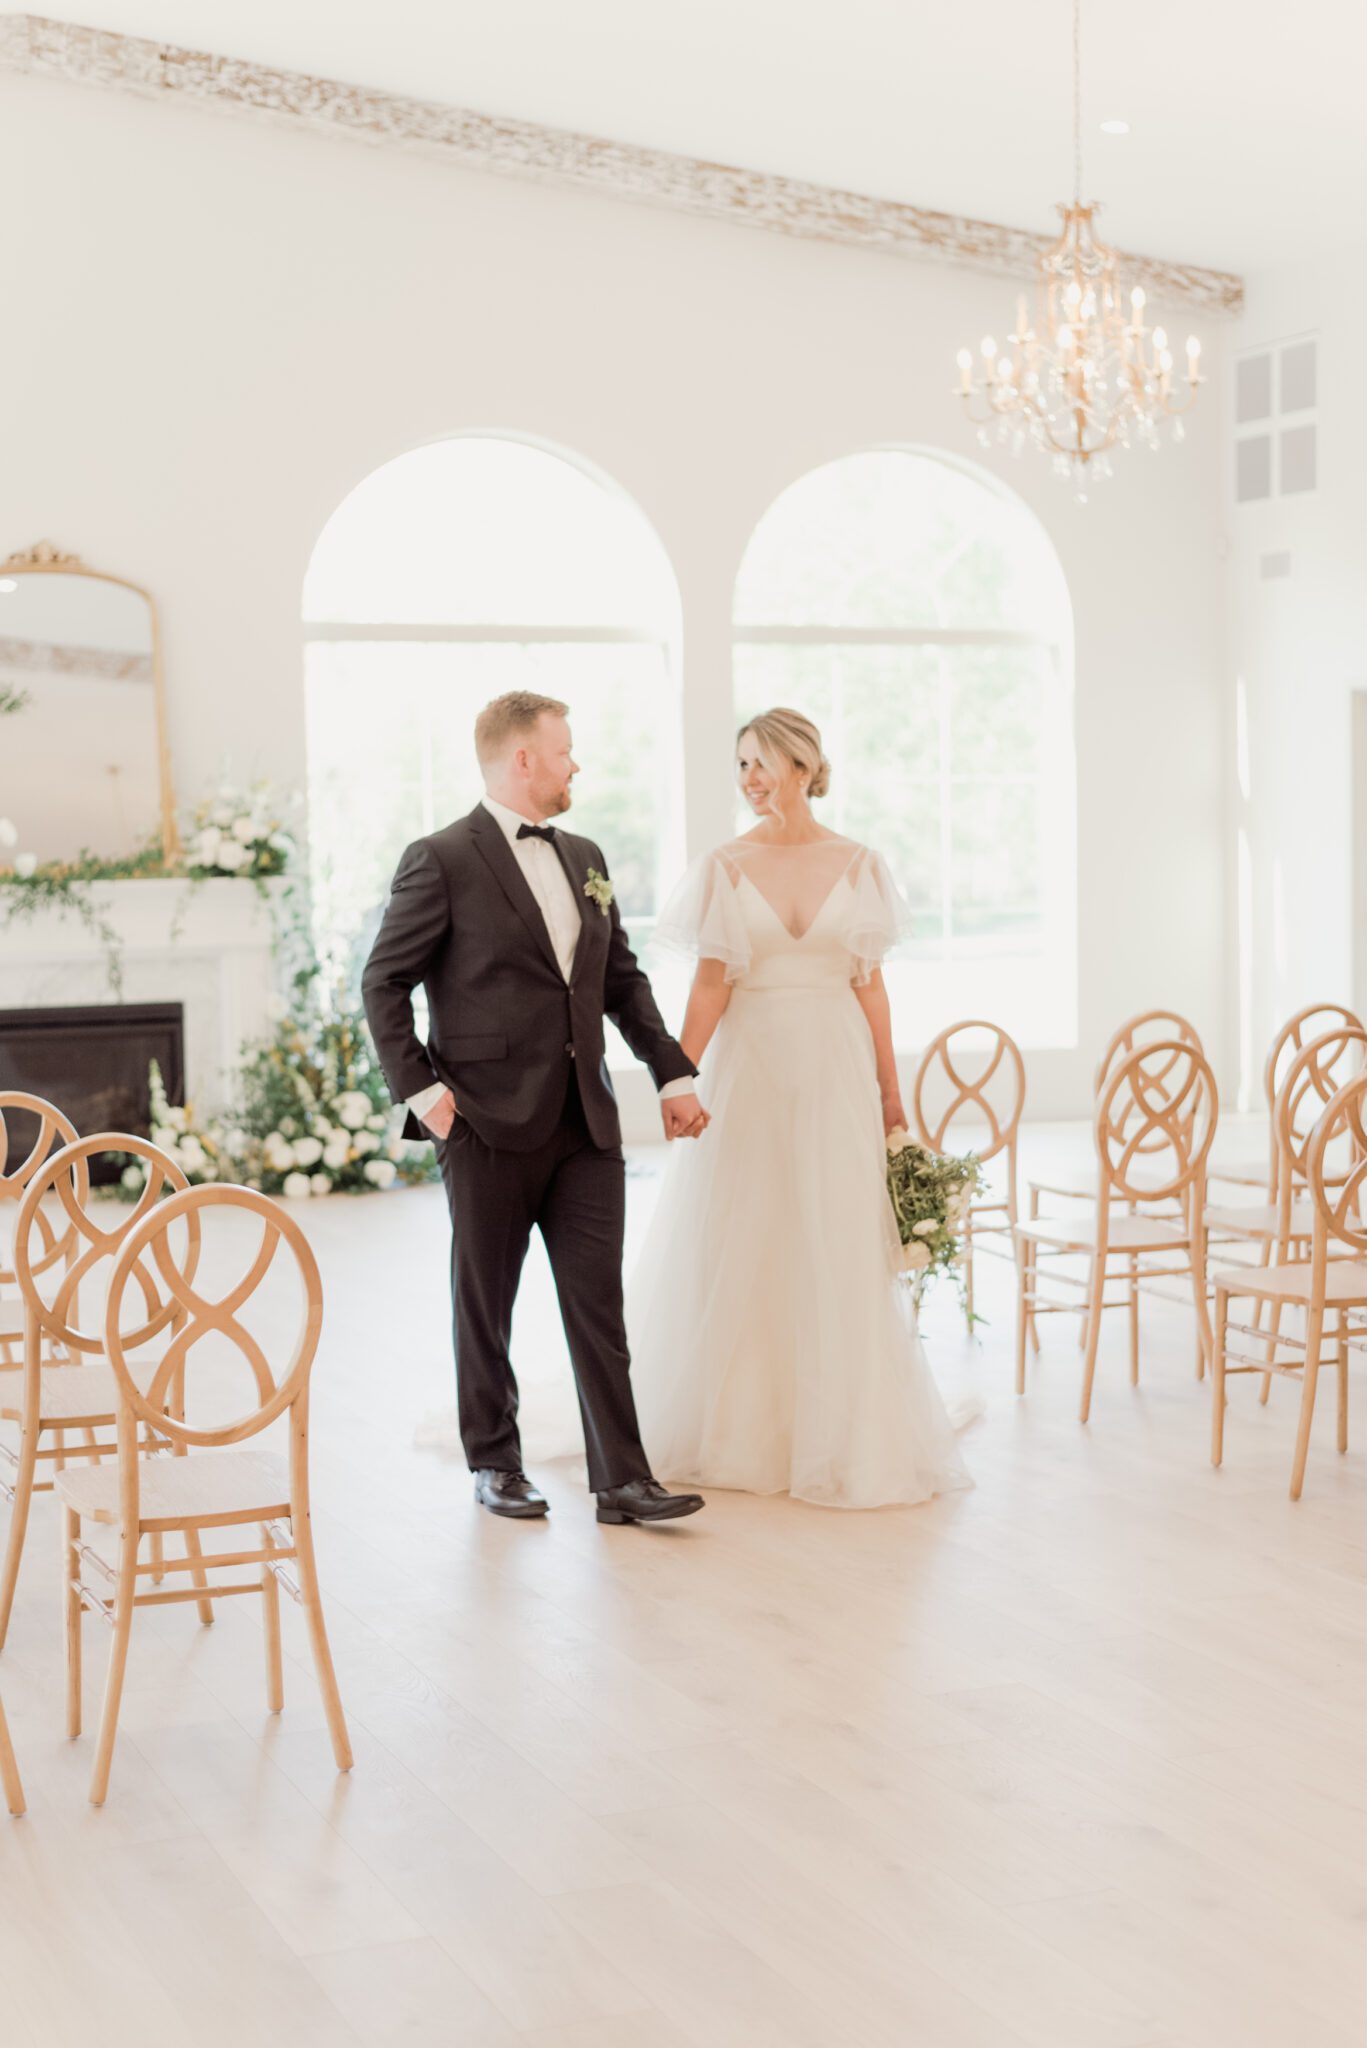 Indoor wedding ceremony at Sparrow Lane with a lush floral installation climbing up the fireplace. Wooden infinity chairs, lush pale yellow, ivory, white, and green fine art wedding colour palette. 